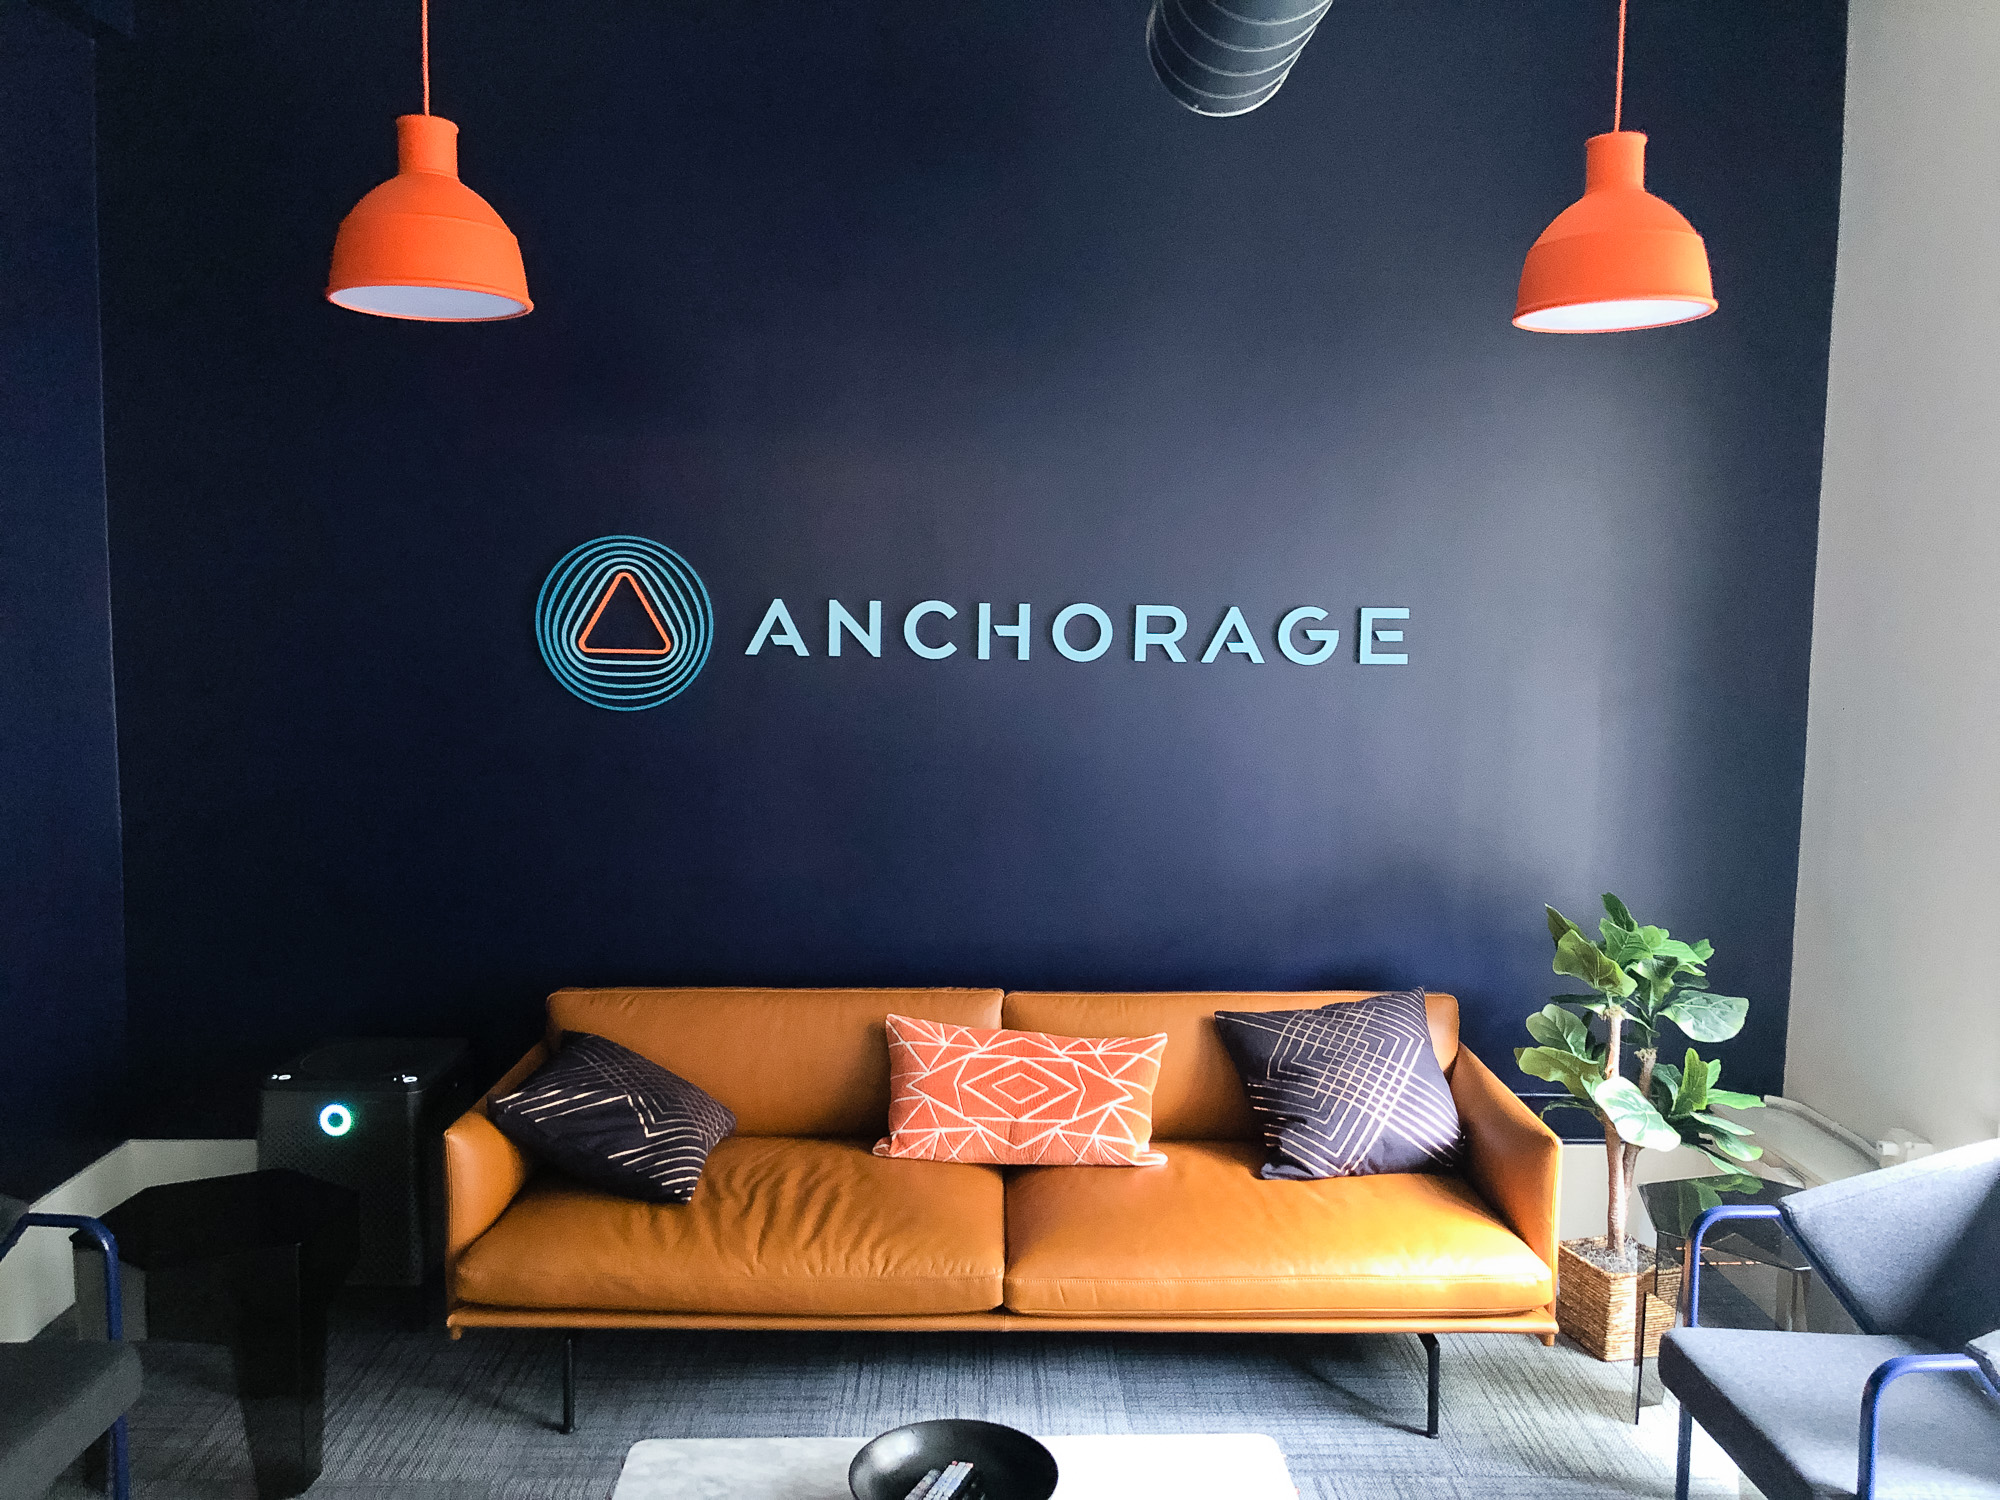 Painted, multi-color acrylic sign on a dark, navy blue wall for the lobby of Anchorage, a San Francisco-based company focused on creating custody solutions for the cryptocurrency ecosystem.